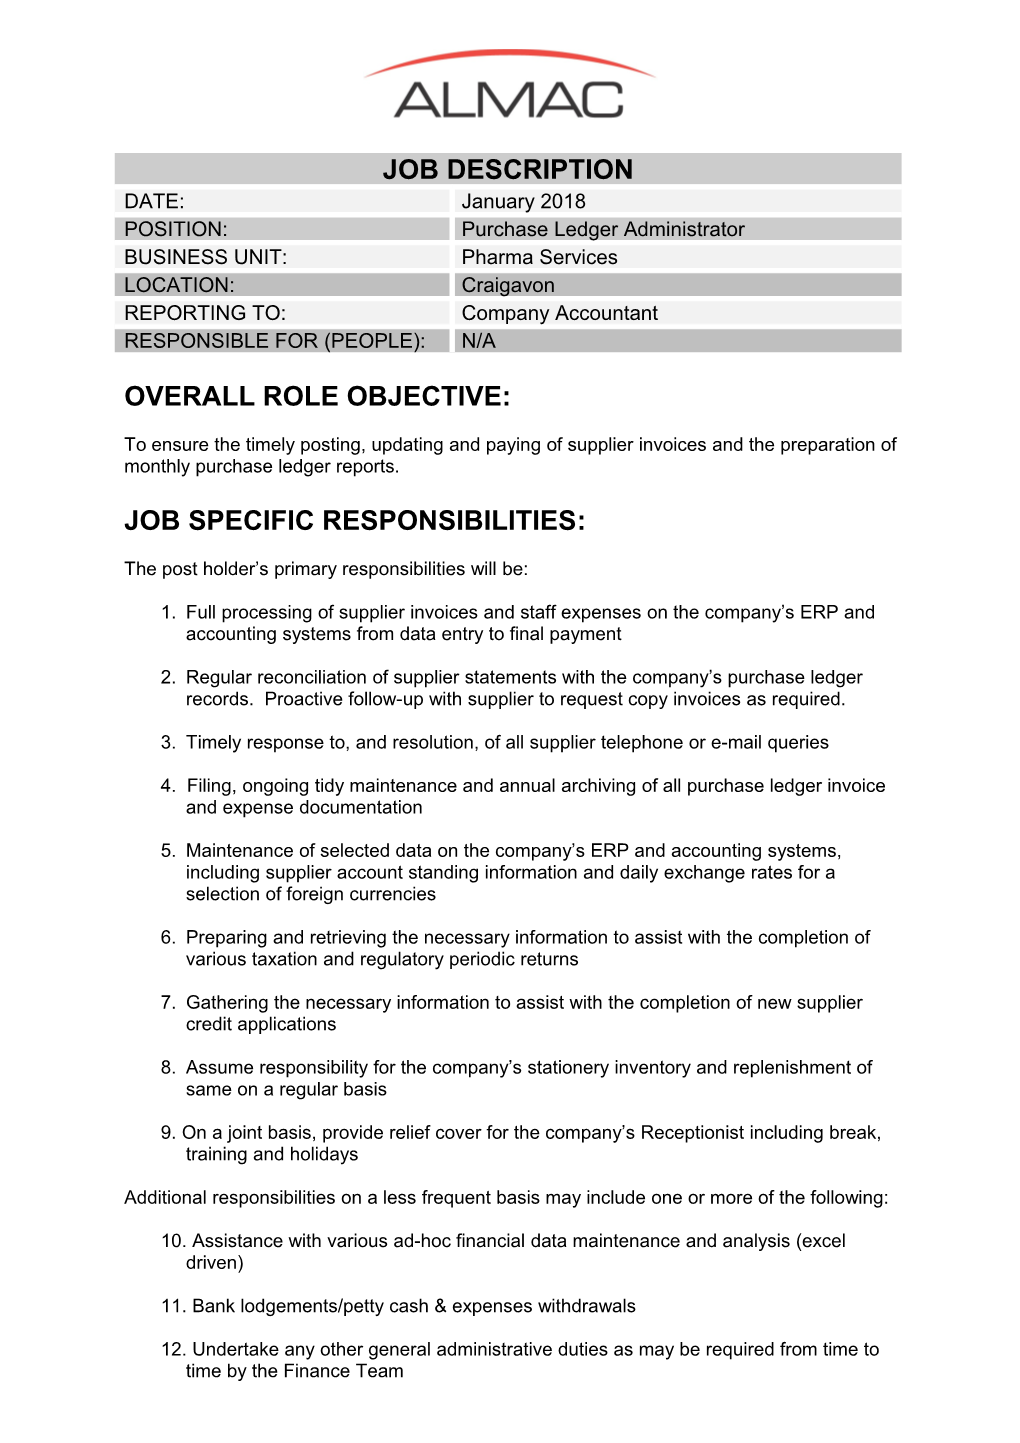 Overall Role Objective s2